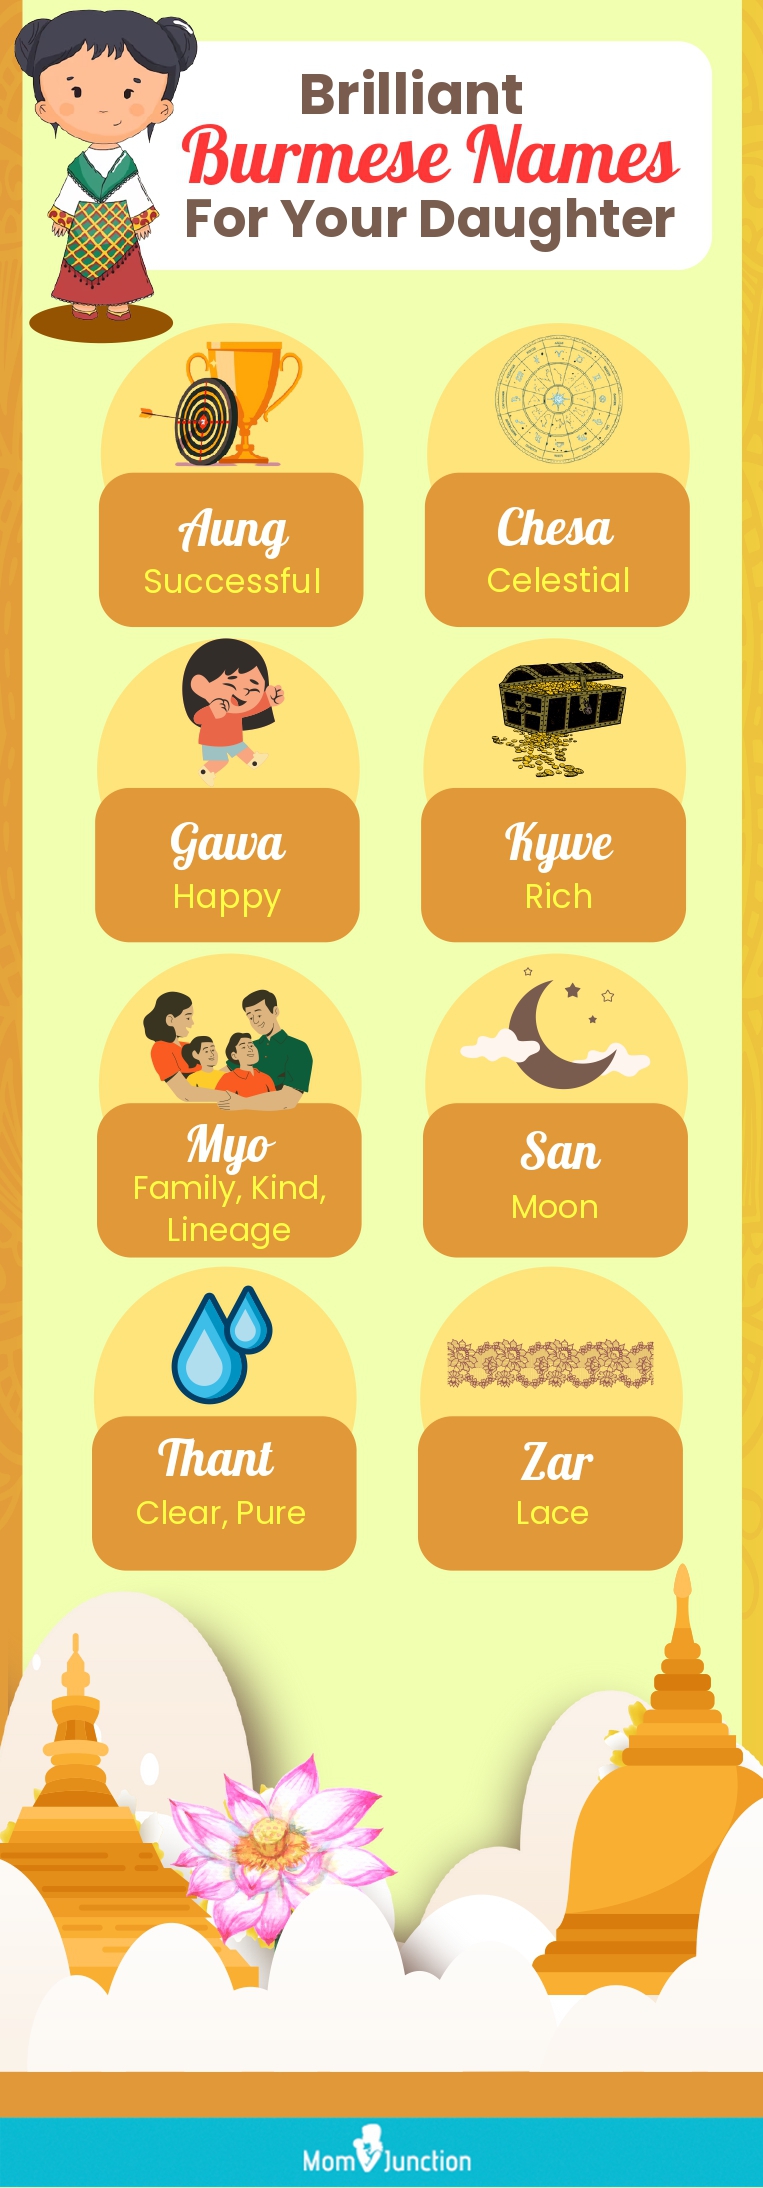 brilliant burmese names for your daughter (infographic)